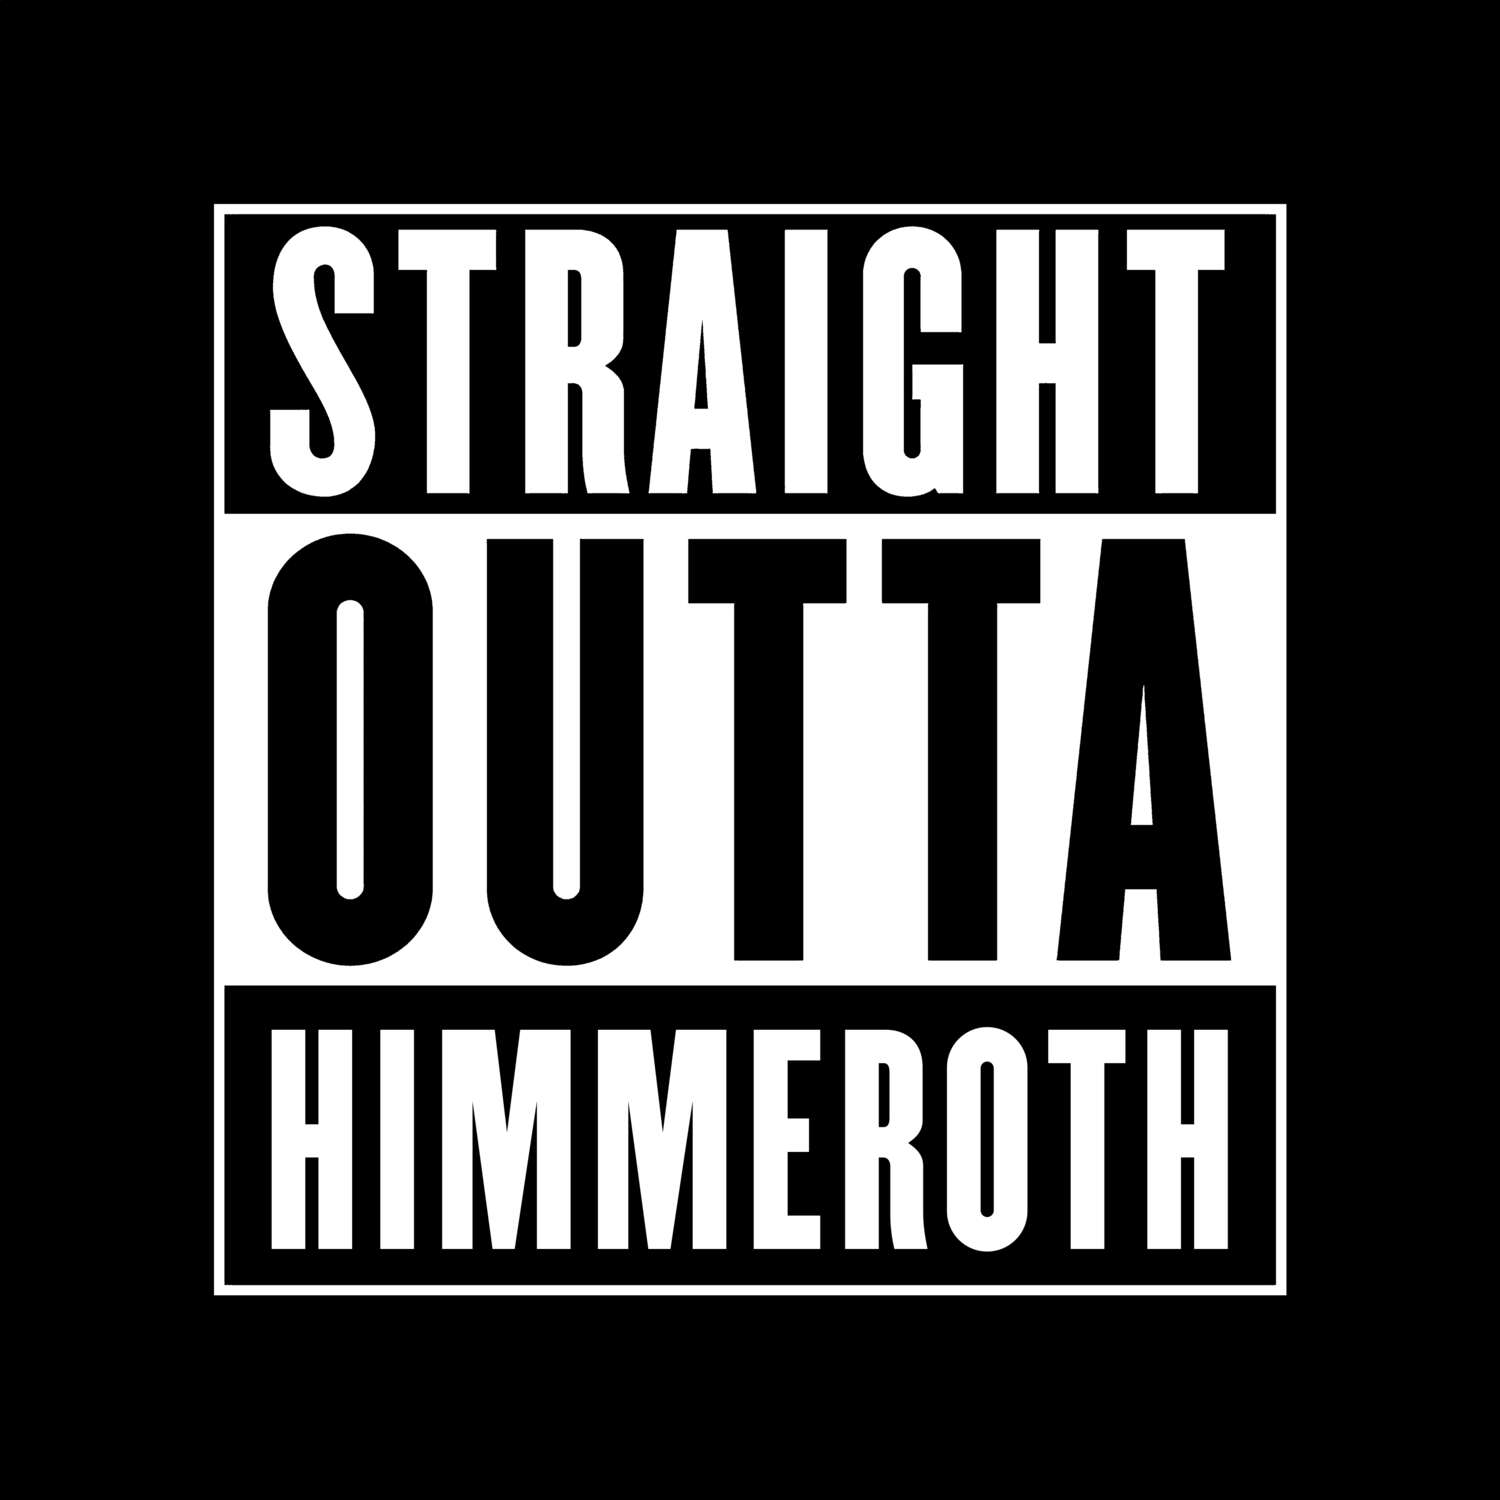 Himmeroth T-Shirt »Straight Outta«